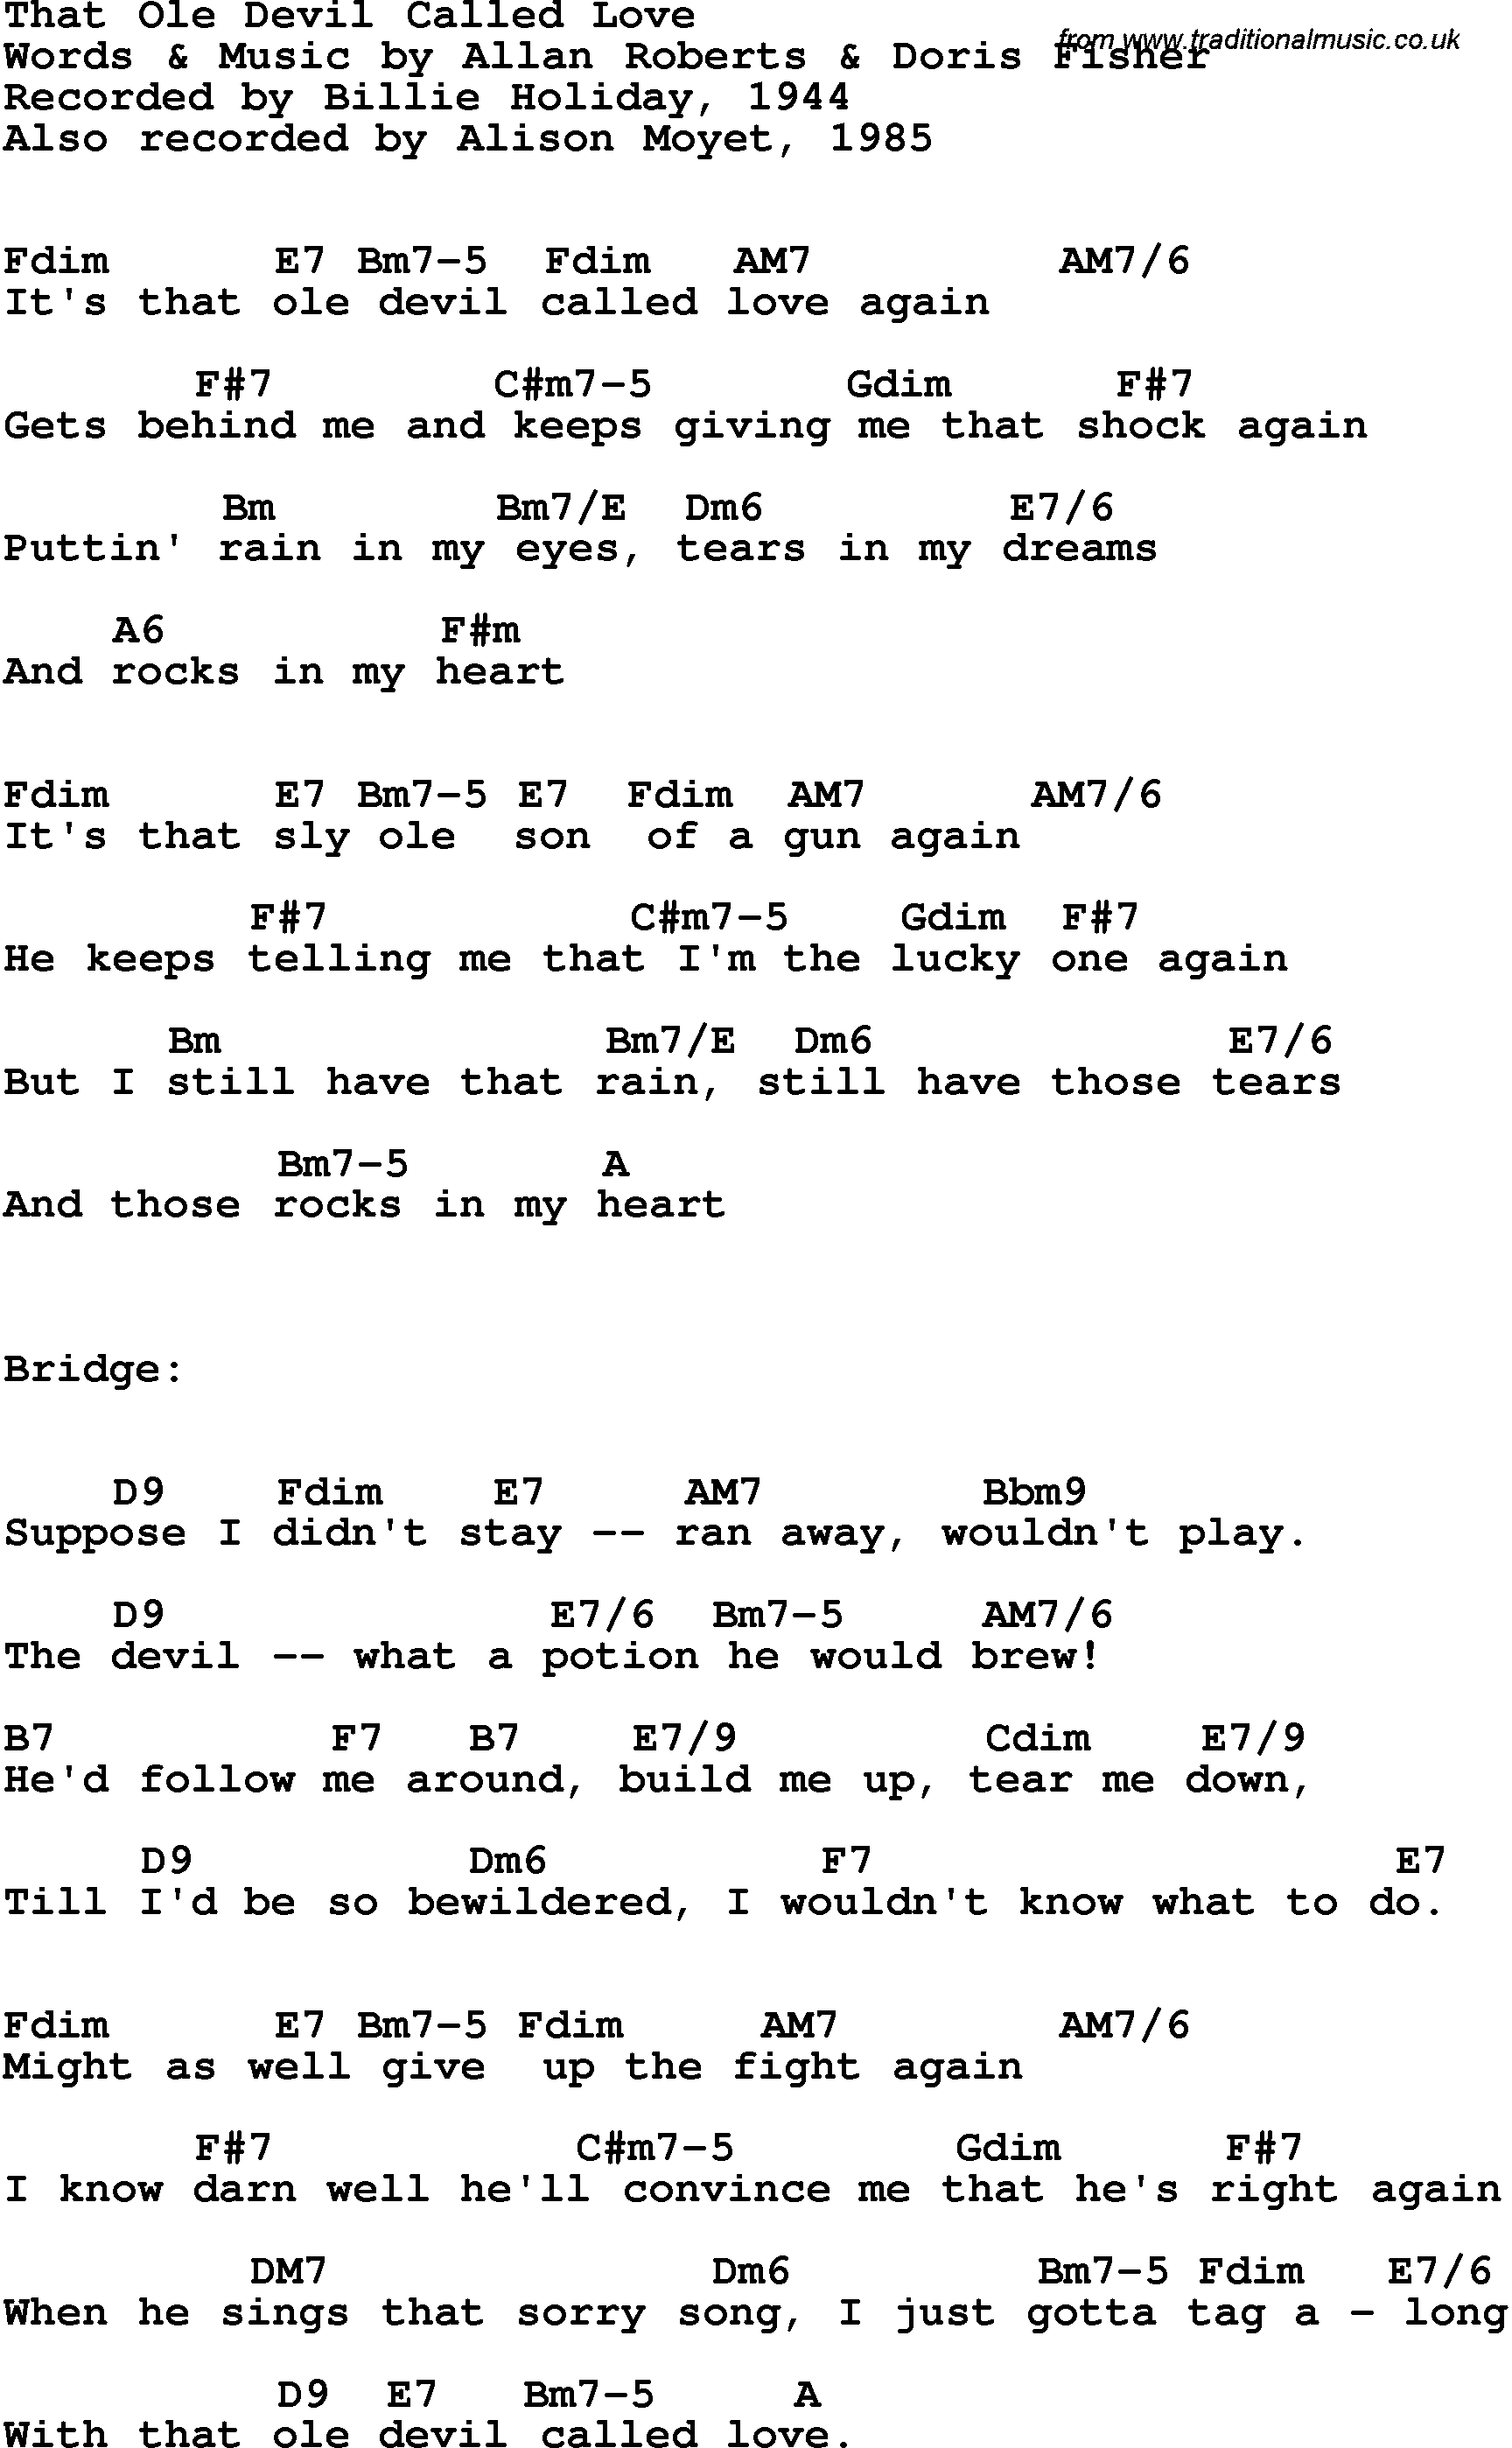 Song Lyrics with guitar chords for That Ole Devil Called Love - Billie Holiday, 1944